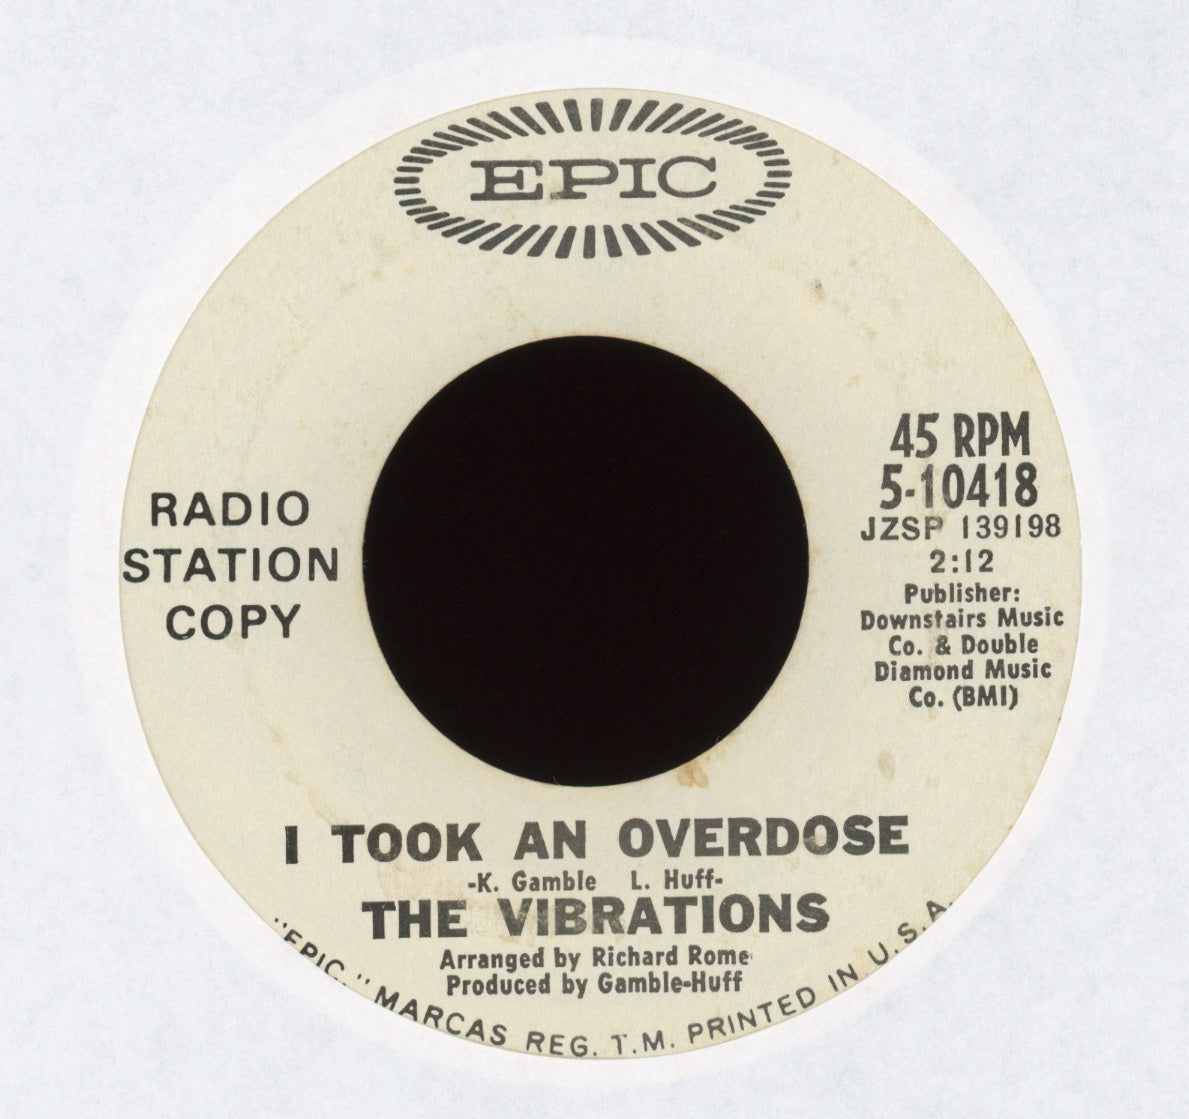 The Vibrations - 'Cause You're Mine / I Took An Overdose on Epic Promo